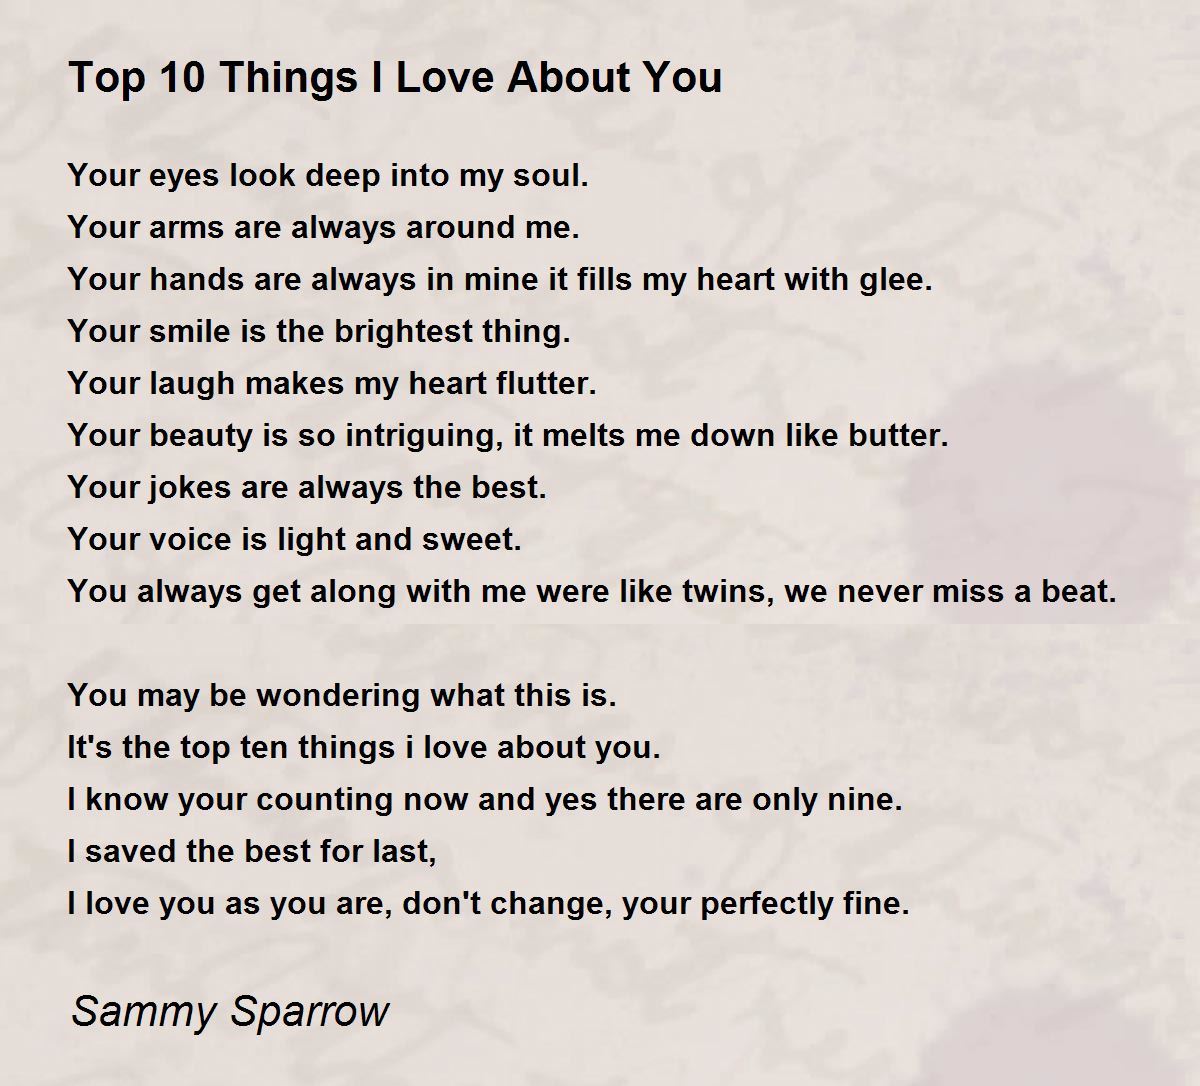 Top 10 Things I Love About You - Top 10 Things I Love About You